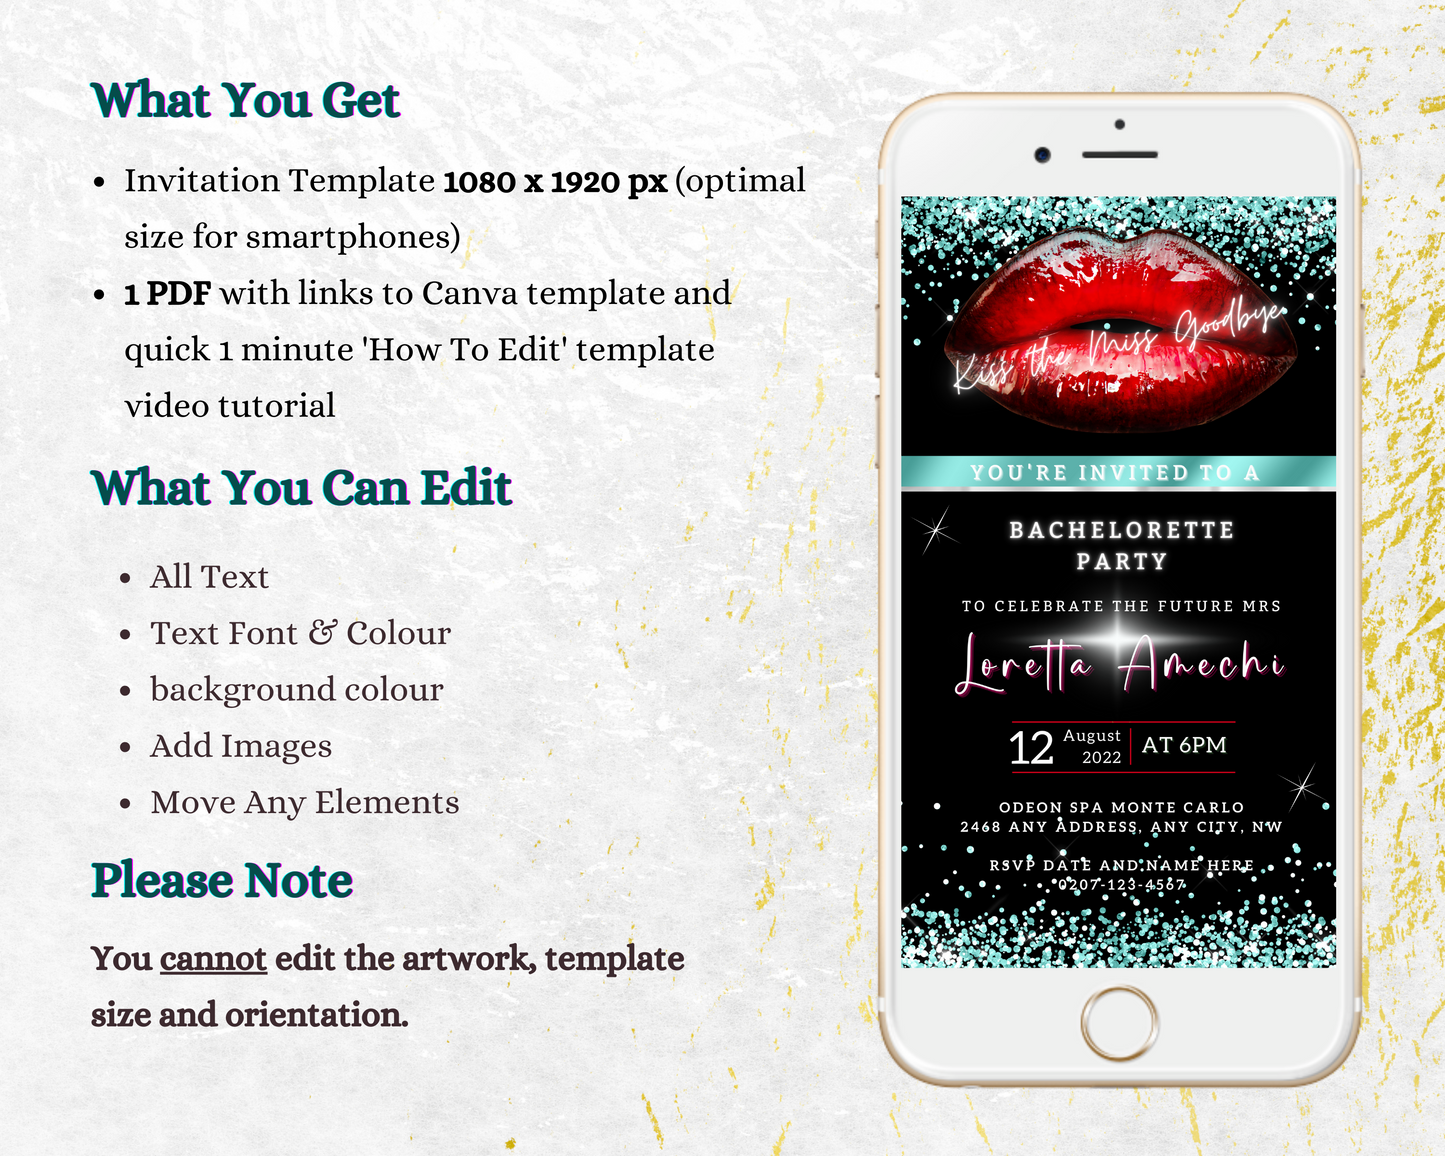 Customisable Digital Red Hot Lips Teal Glitter Bachelorette Party Evite displayed on a smartphone screen, featuring a close-up of red lips.